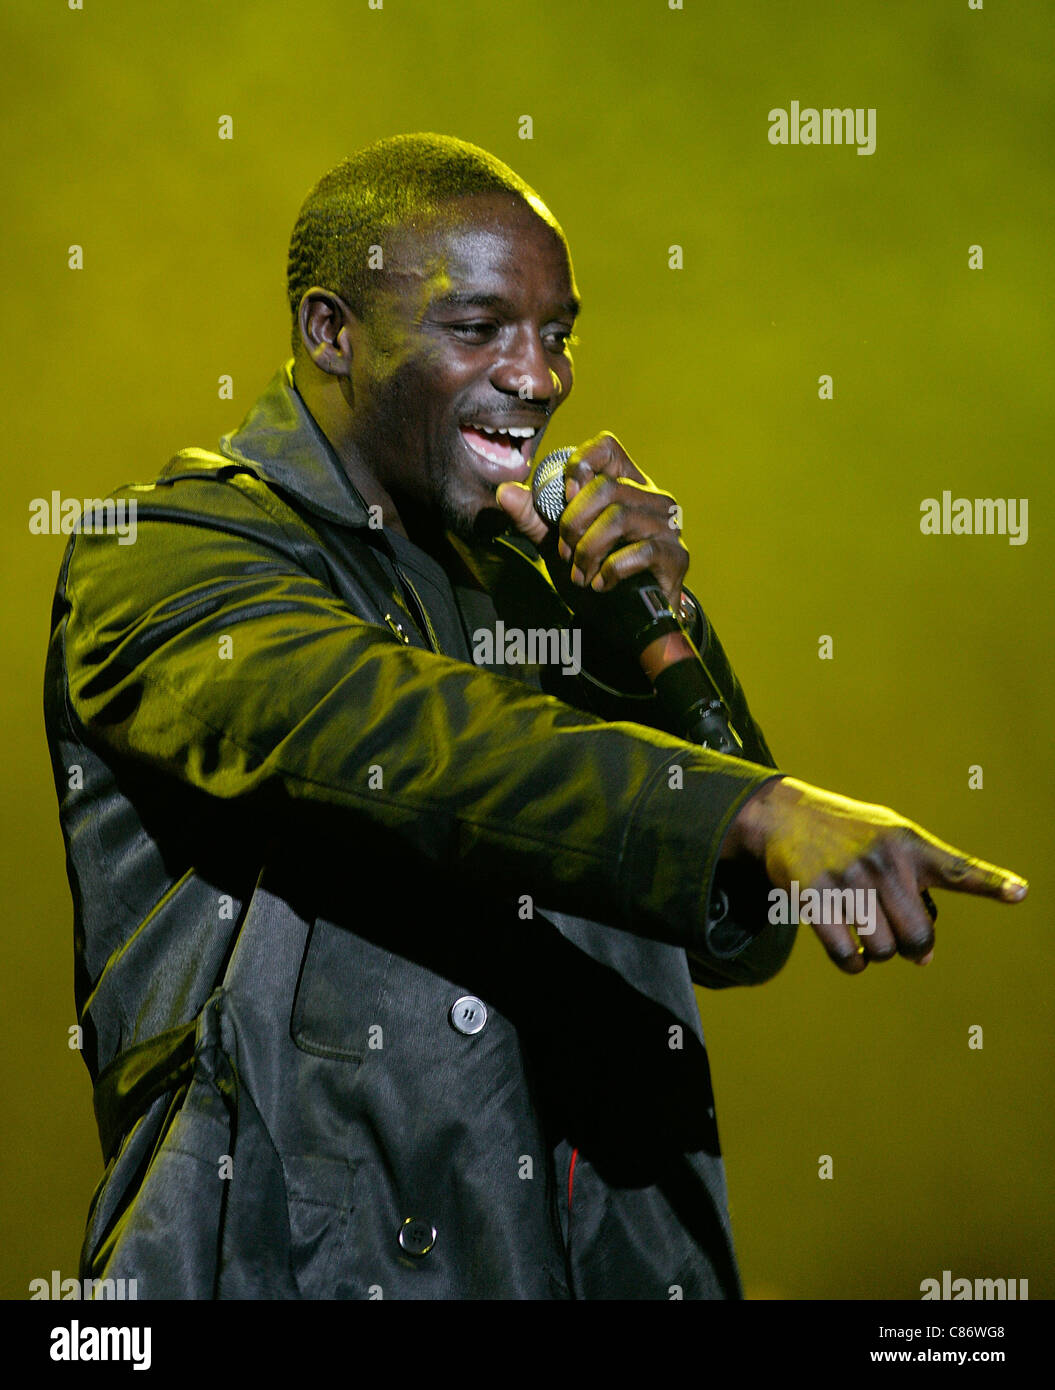 BELFAST, UNITED KINGDOM - JANUARY 28: Akon performs at the Odyssey Arena on January 28, 2009 in Belfast, Northern Ireland Stock Photo